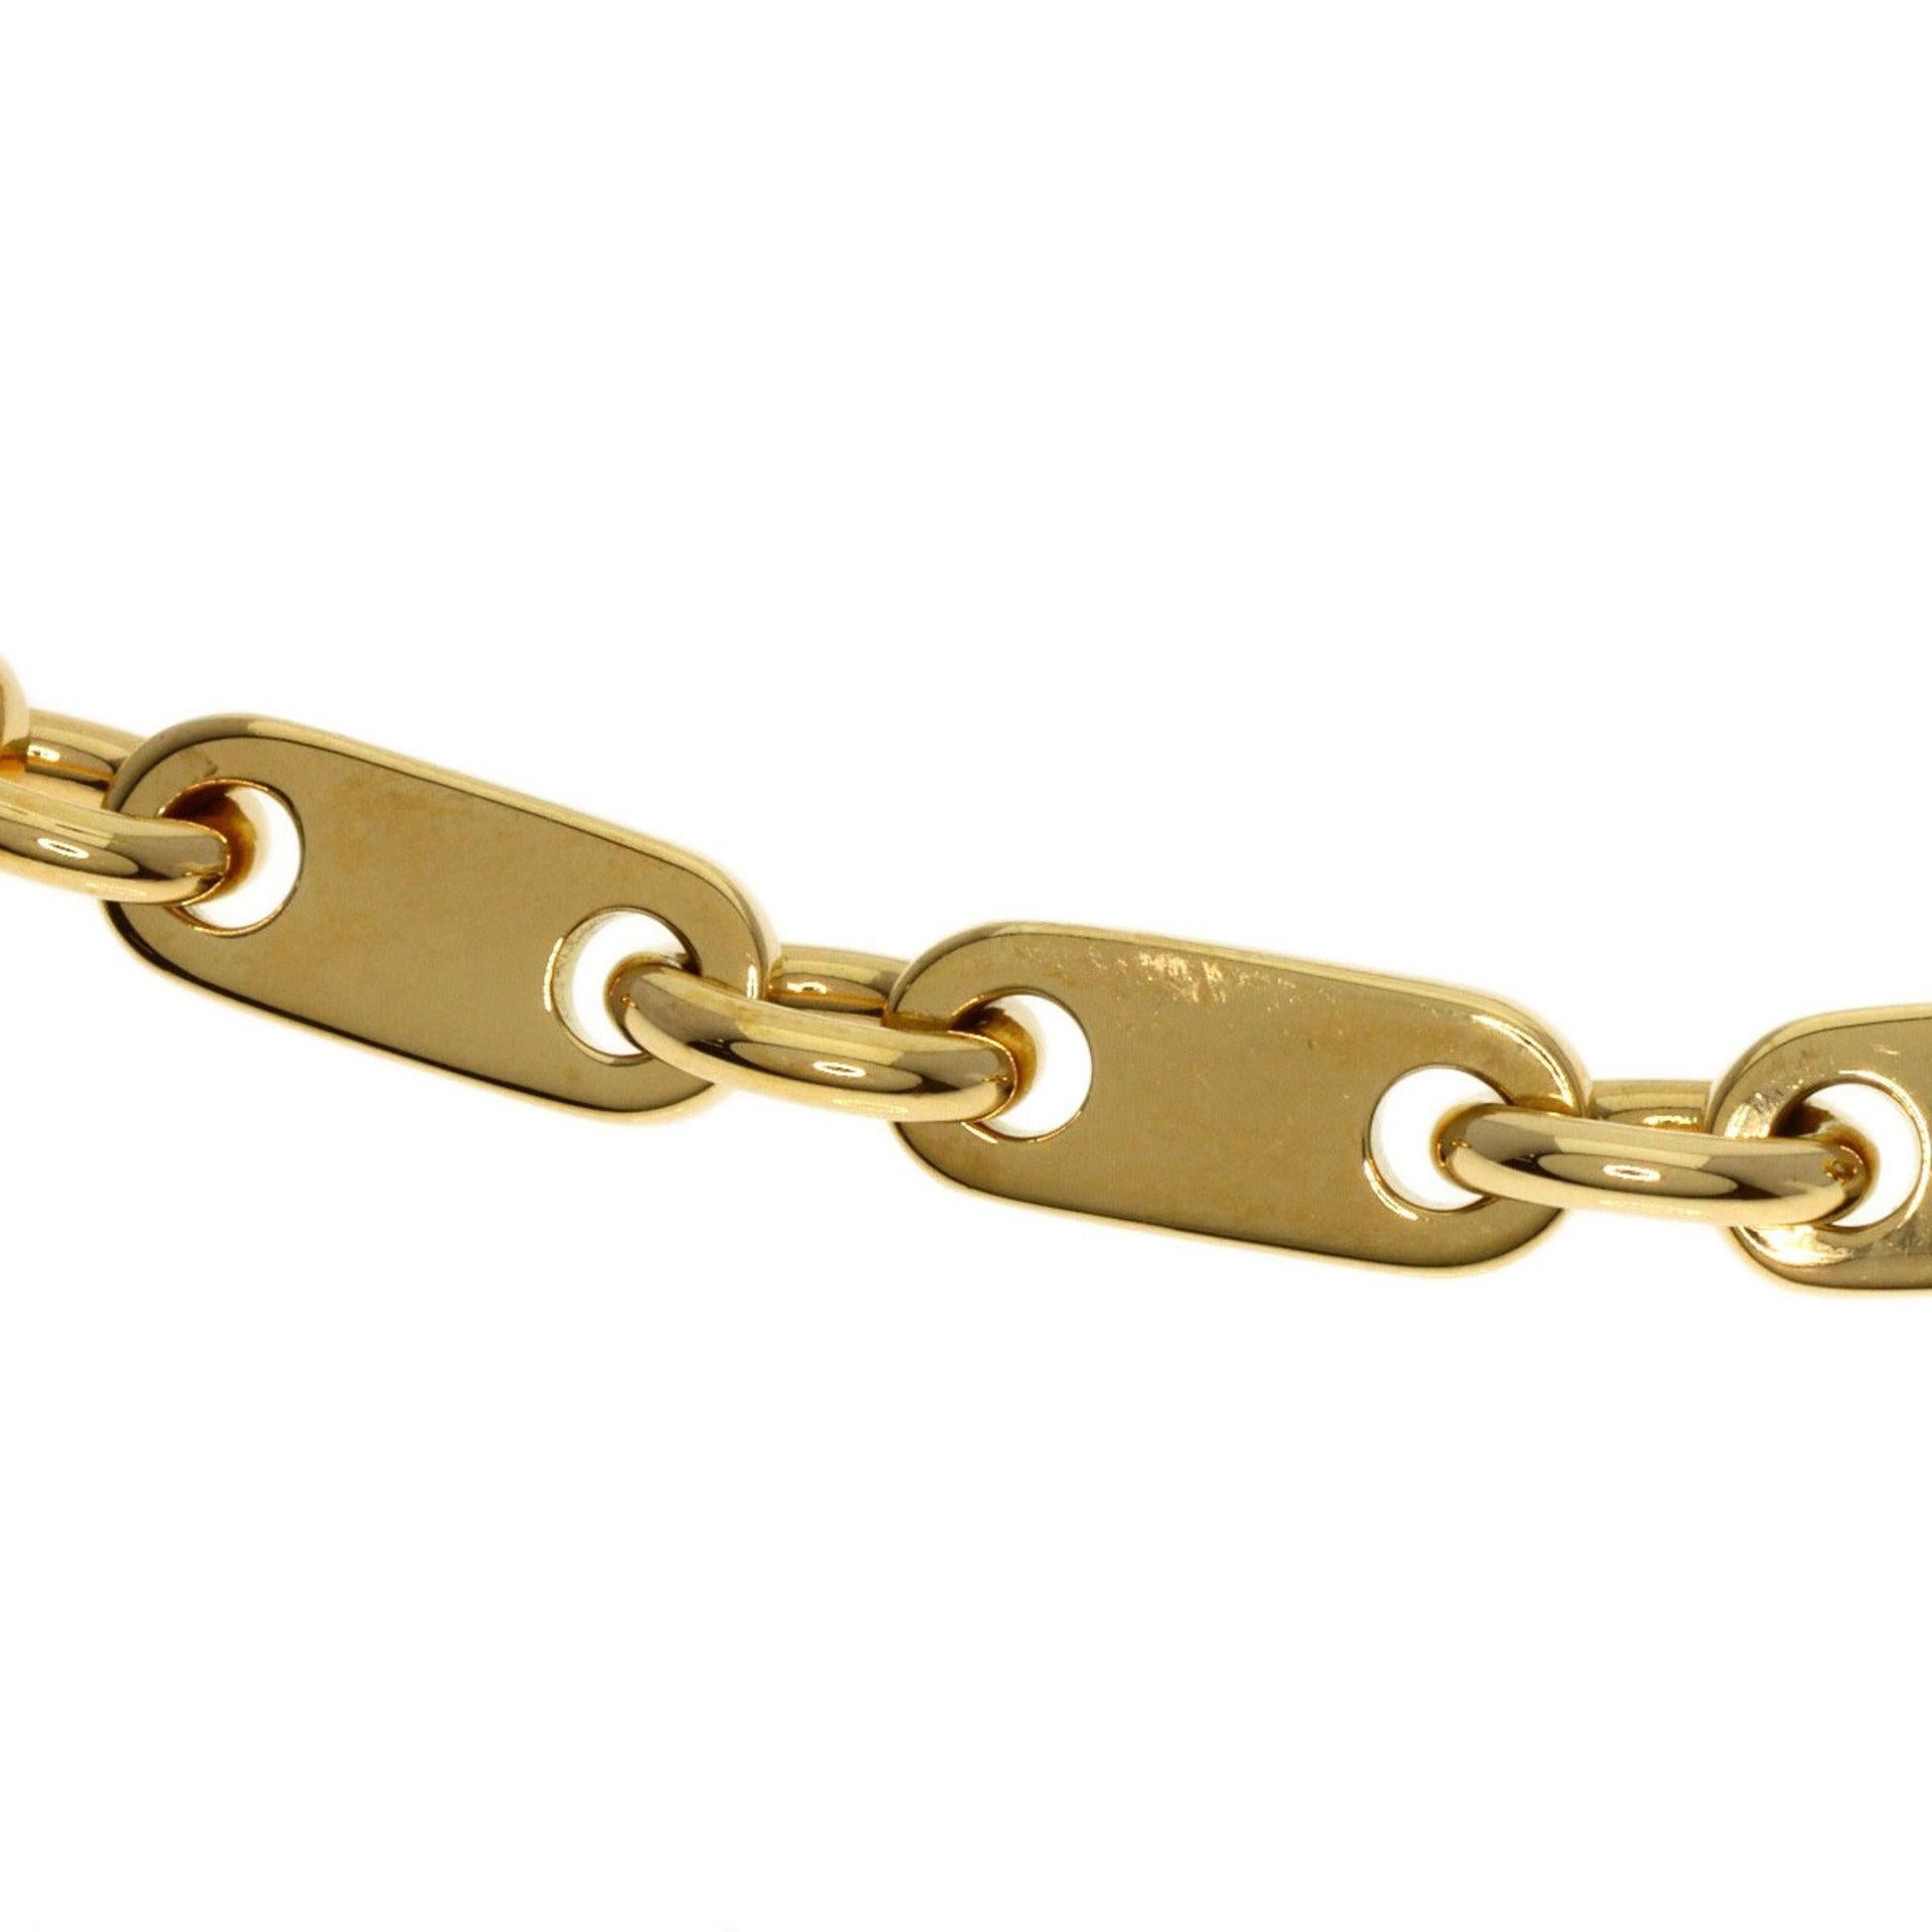 Cartier Figaro Bracelet in 18K Yellow Gold

Additional Information:
Brand: Cartier
Gender: Women
Material: Yellow gold (18K)
Condition details: This item has been used and may have some minor flaws. Before purchasing, please refer to the images for